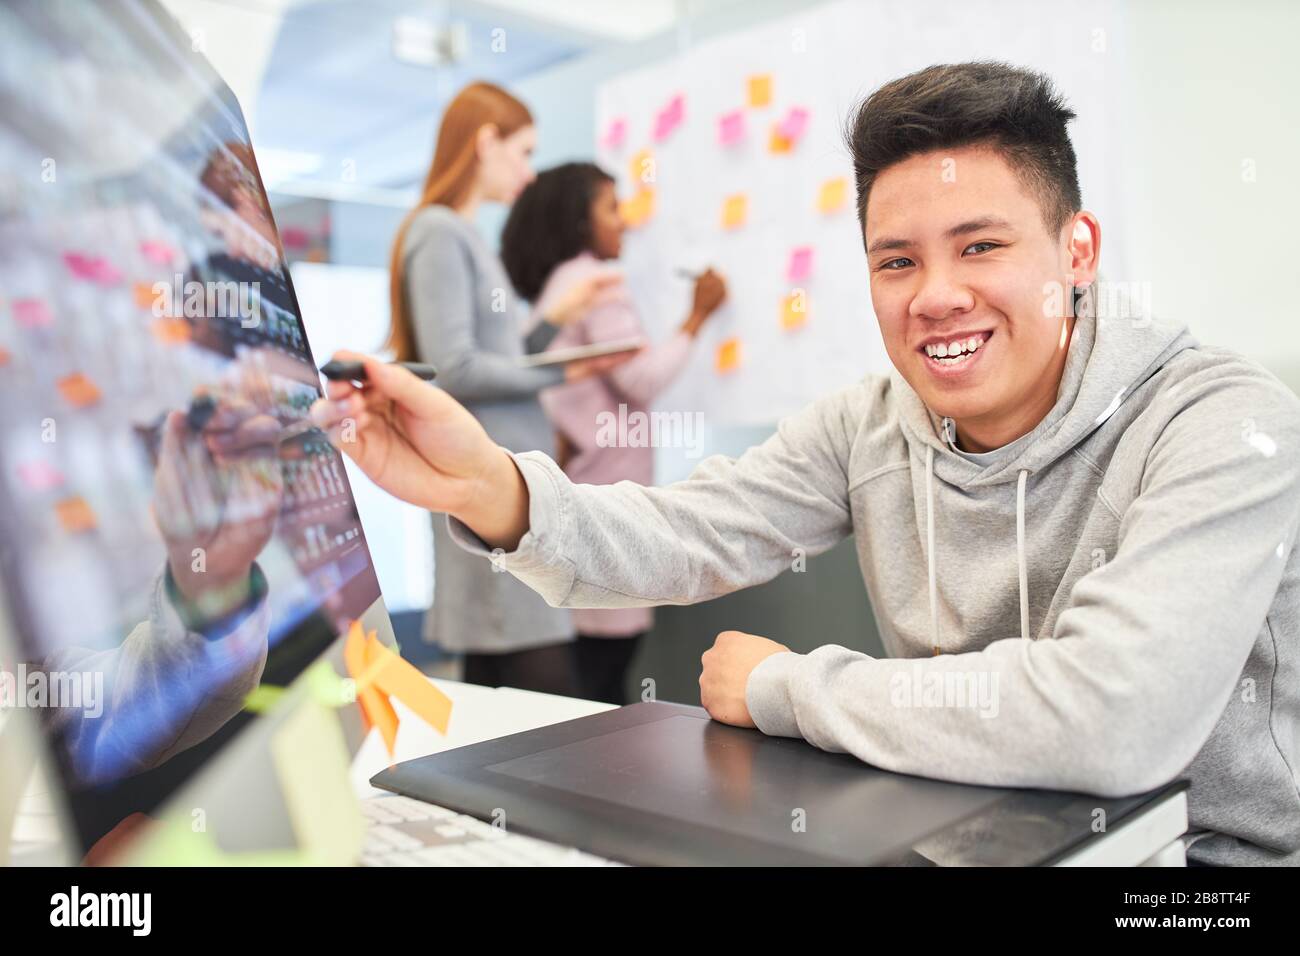 Creative graphic designer is happy about an idea for the layout of a website Stock Photo